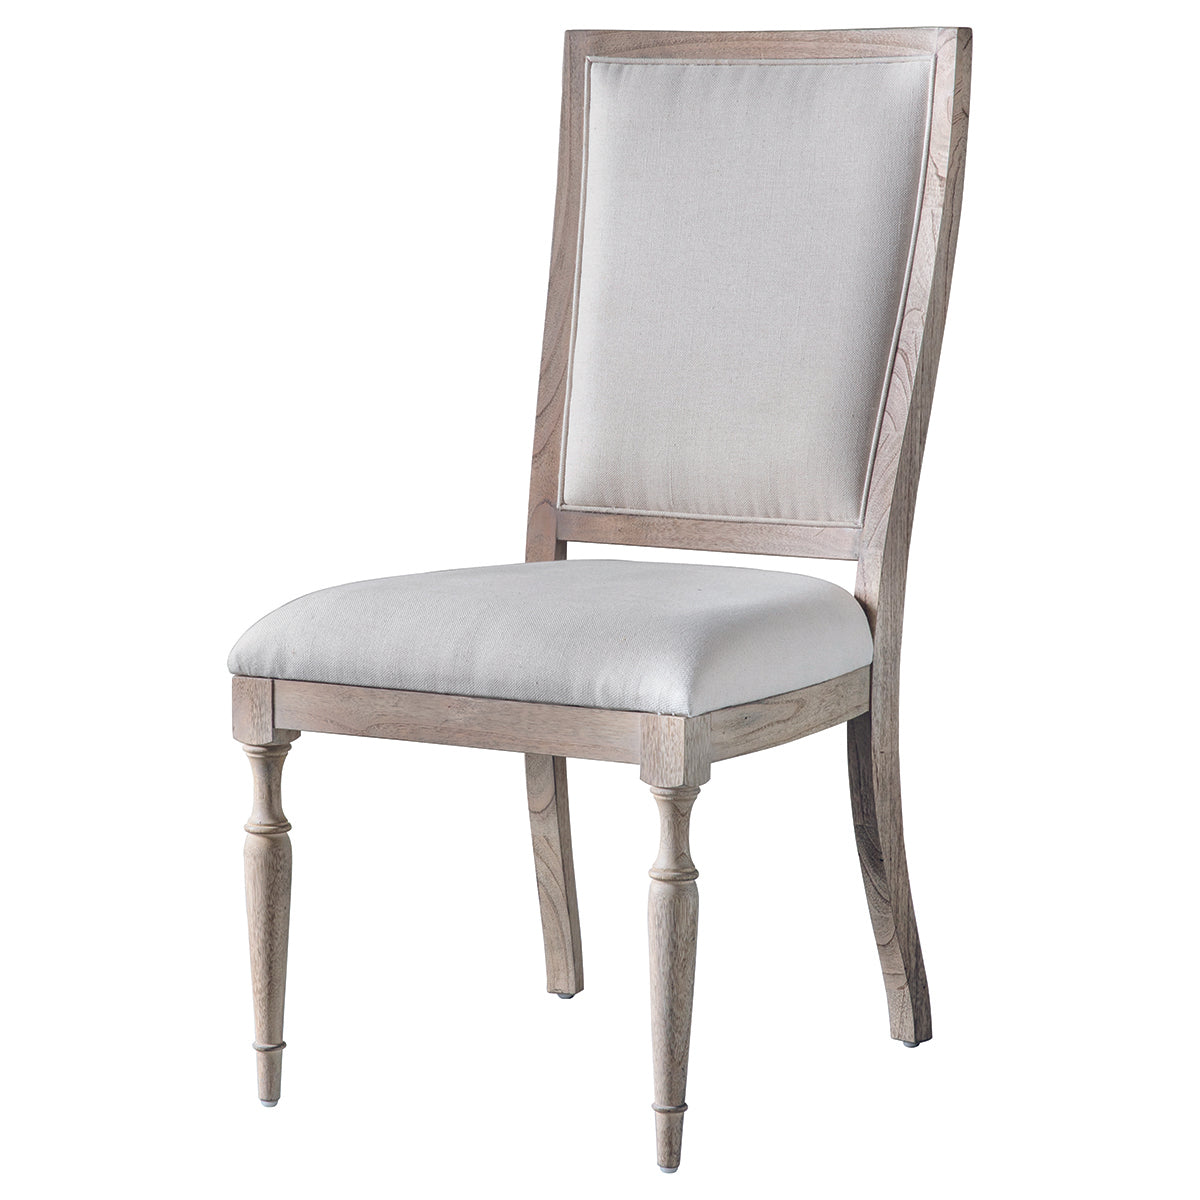 Load image into Gallery viewer, A Kikiathome.co.uk Belsford Side Chair 500x610x1010mm, perfect for interior decor or home furniture, featuring a beige upholstered seat.
